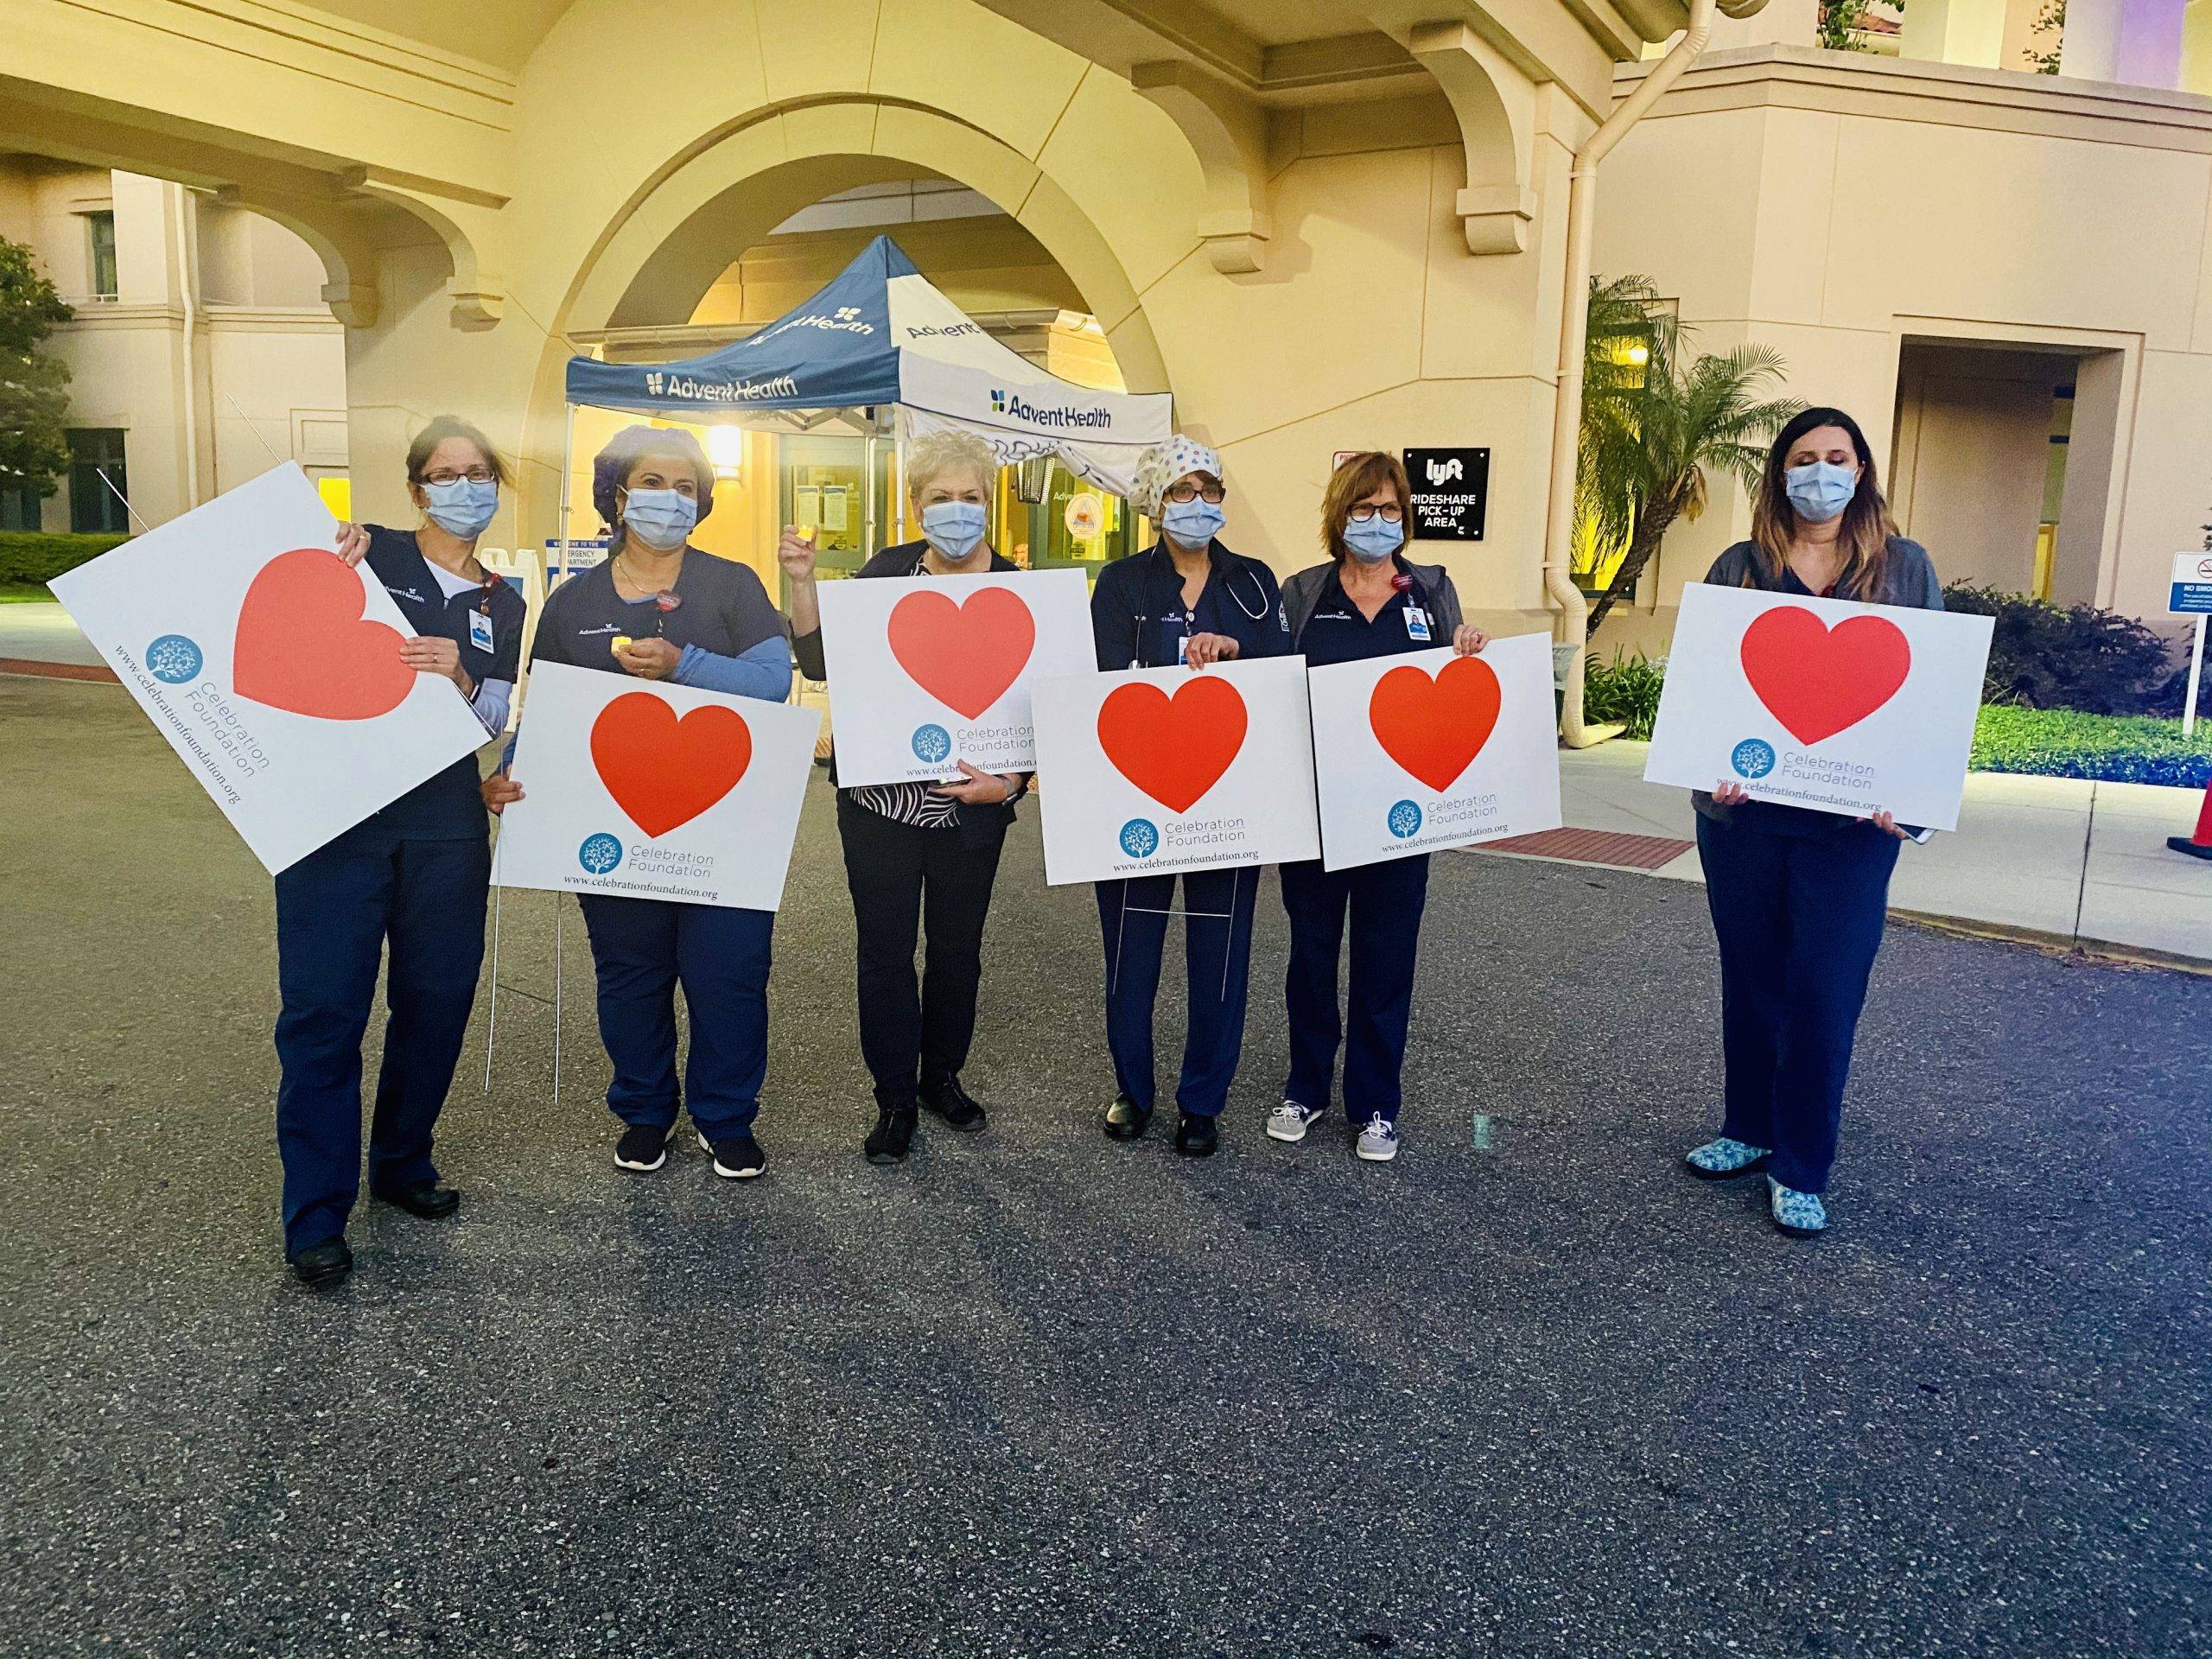 AdventHealth Medical staff with heart signs